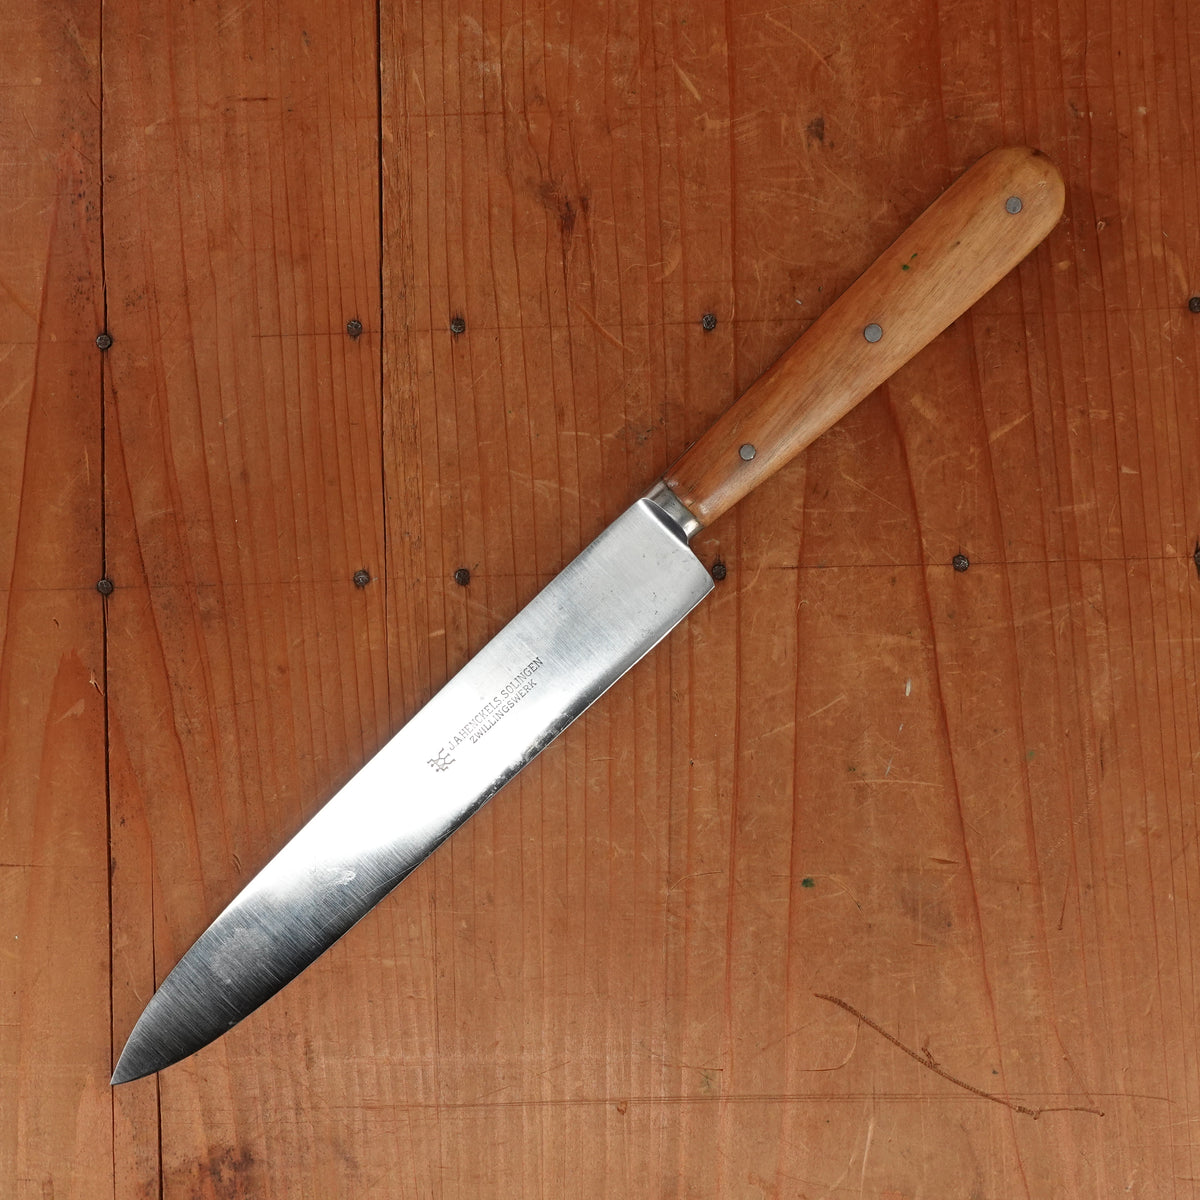 J A Henckels 7.25" Slicer / Kitchen Knife Carbon Steel Cherry Early 20th C 1920s?